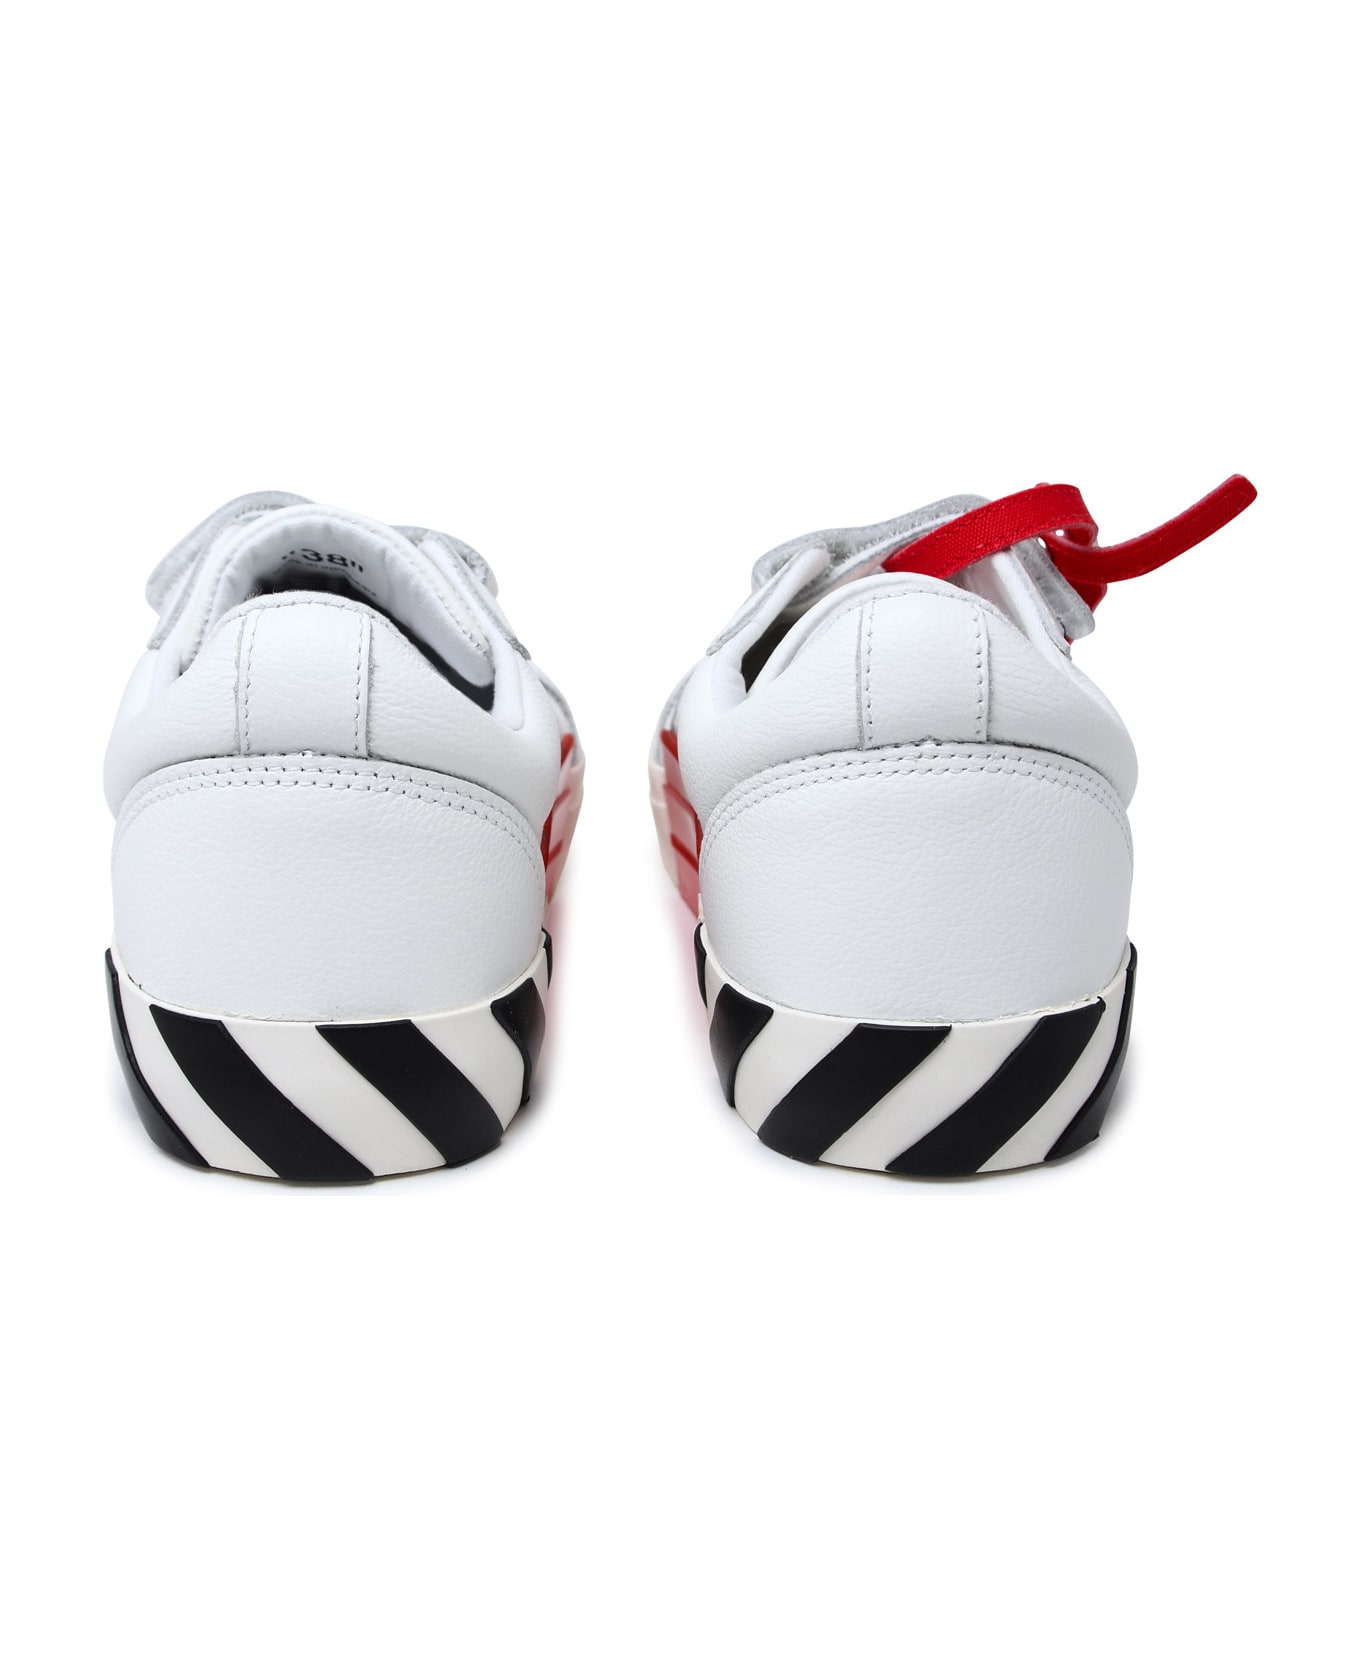 Off-White 'vulcanized' White Leather Sneakers - White